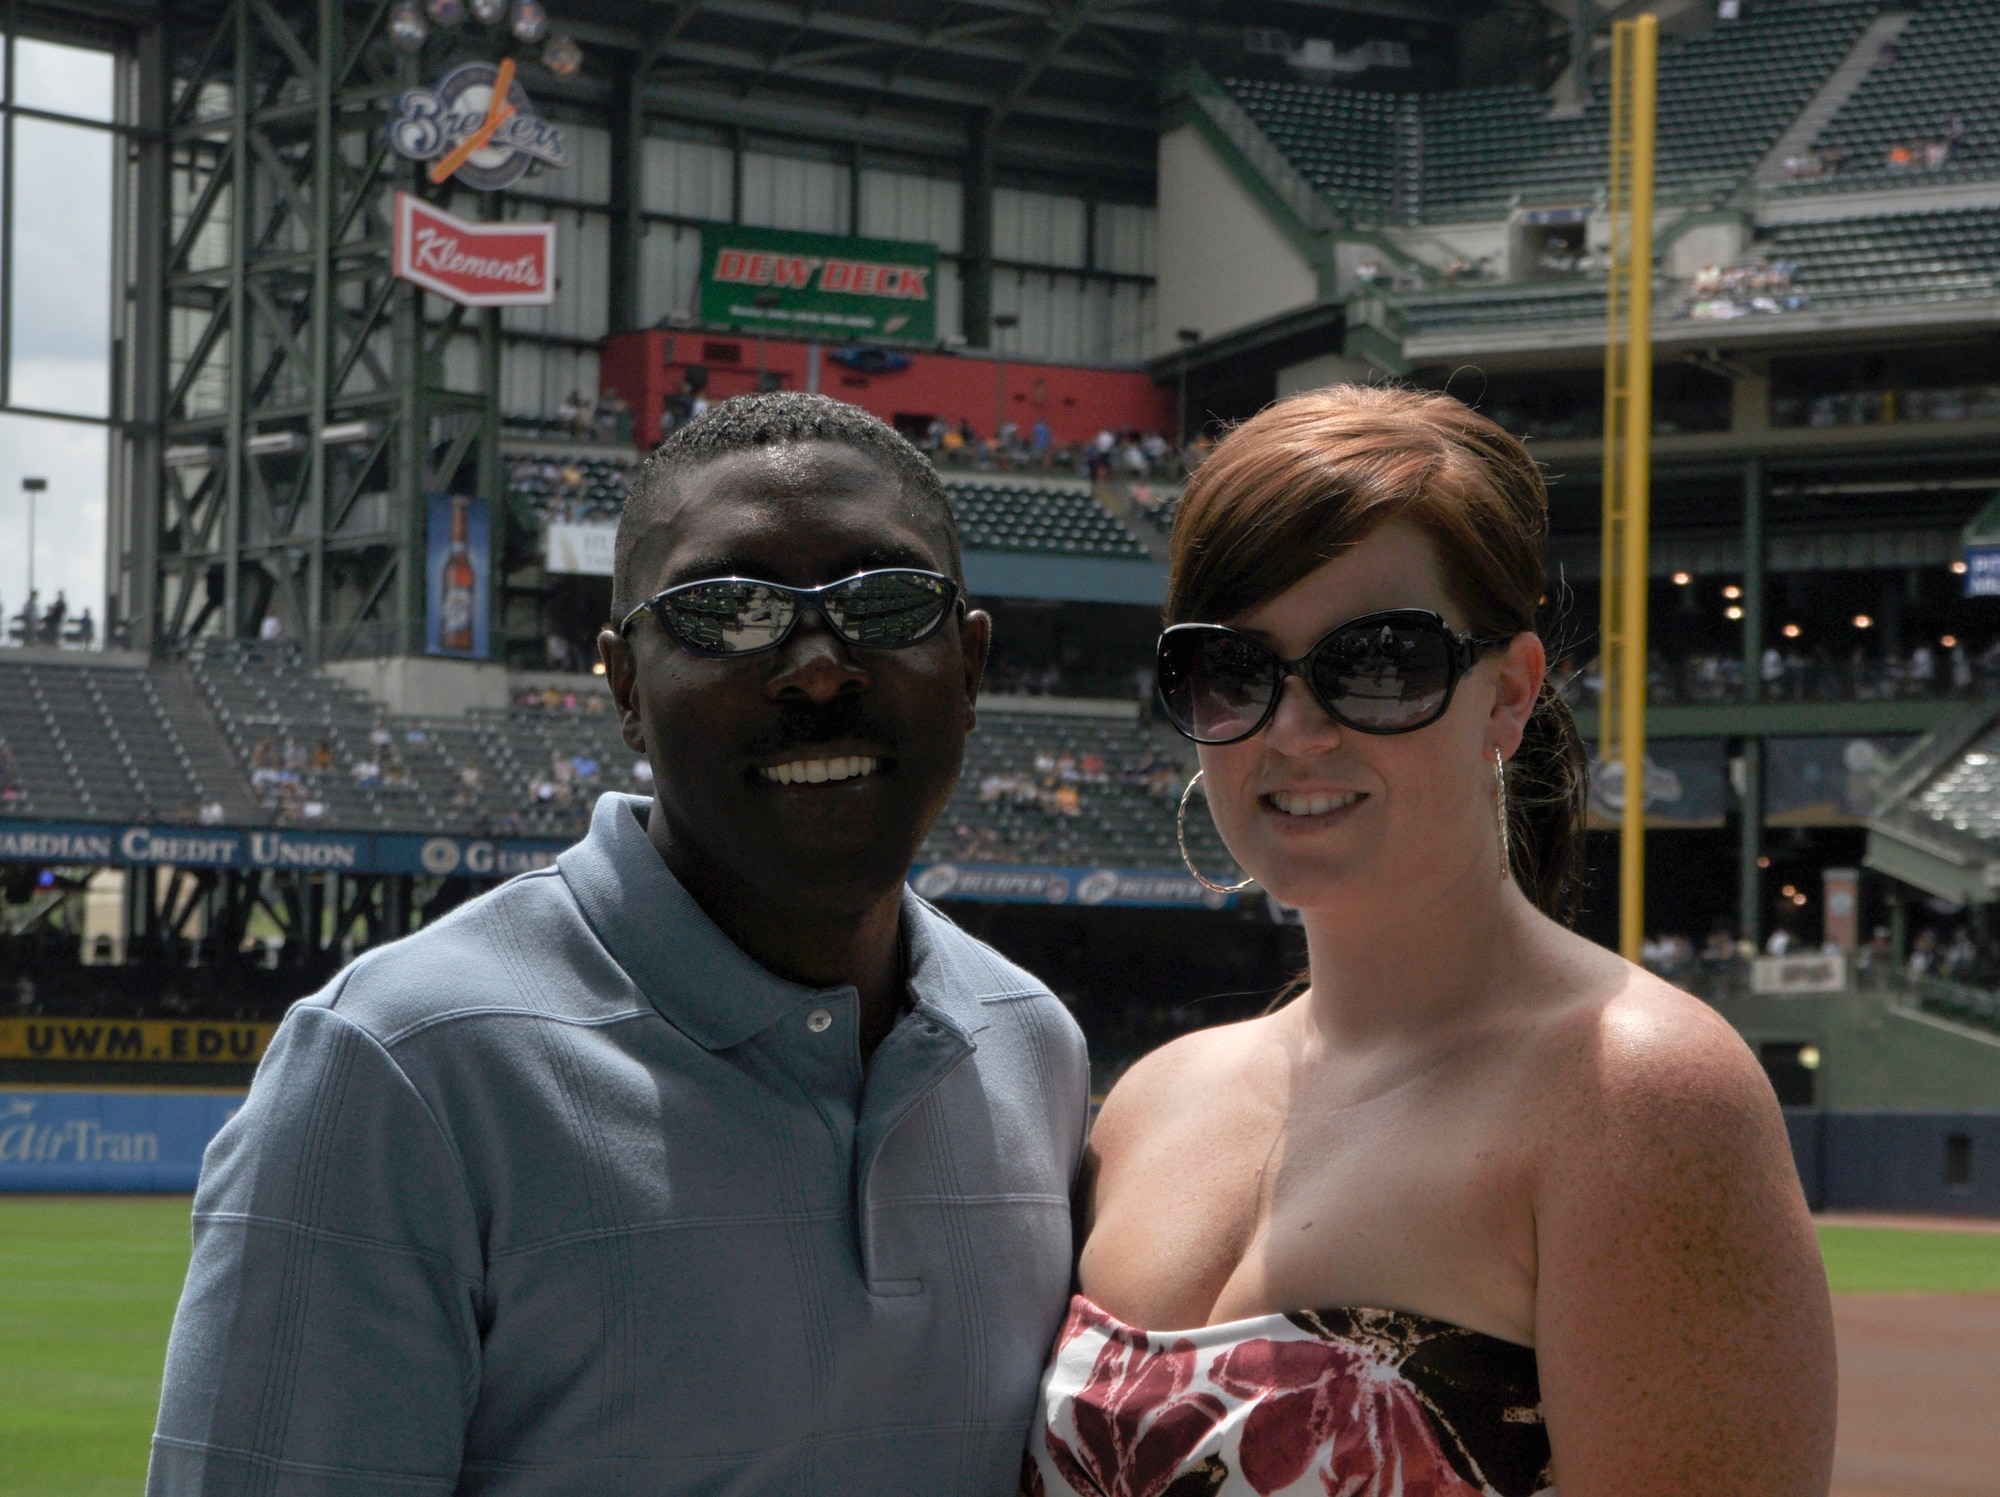 Senior Master Sgt. Marlin Mosley, an instructor boom operator for the 128th Air Refueling Wing, Milwaukee, and his wife, Jessica Mosley, stand near the ball field at Miller Park, Milwaukee, on Sunday, July 11, 2010. Sergeant Mosley was recognized during the pre-game of the Brewers' Sunday match for his continuing service to the nation and for his excellent performance during recent deployments. 
